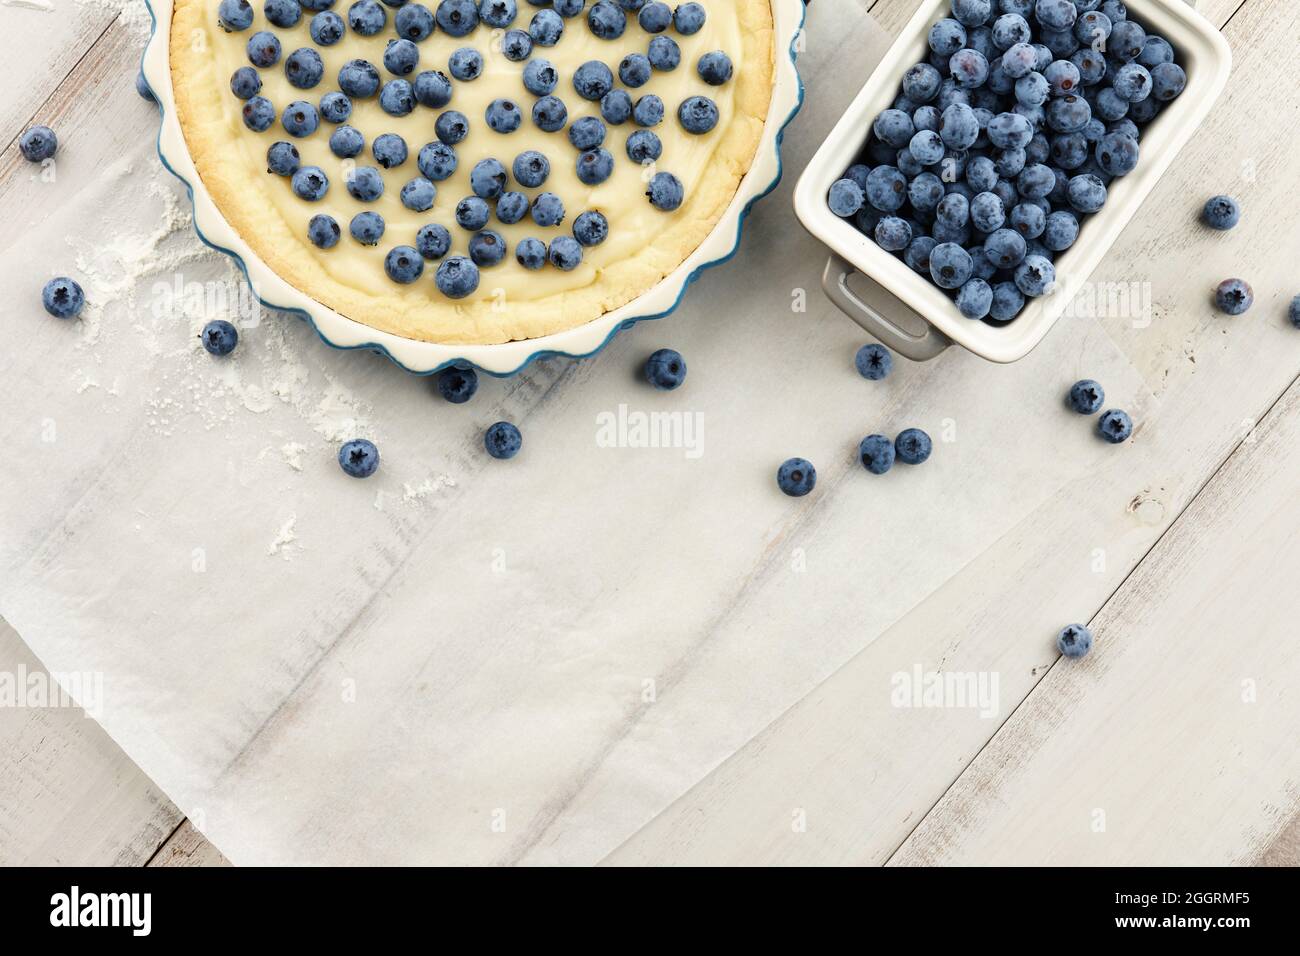 Cooking blueberry pie or tart with fresh berries Stock Photo